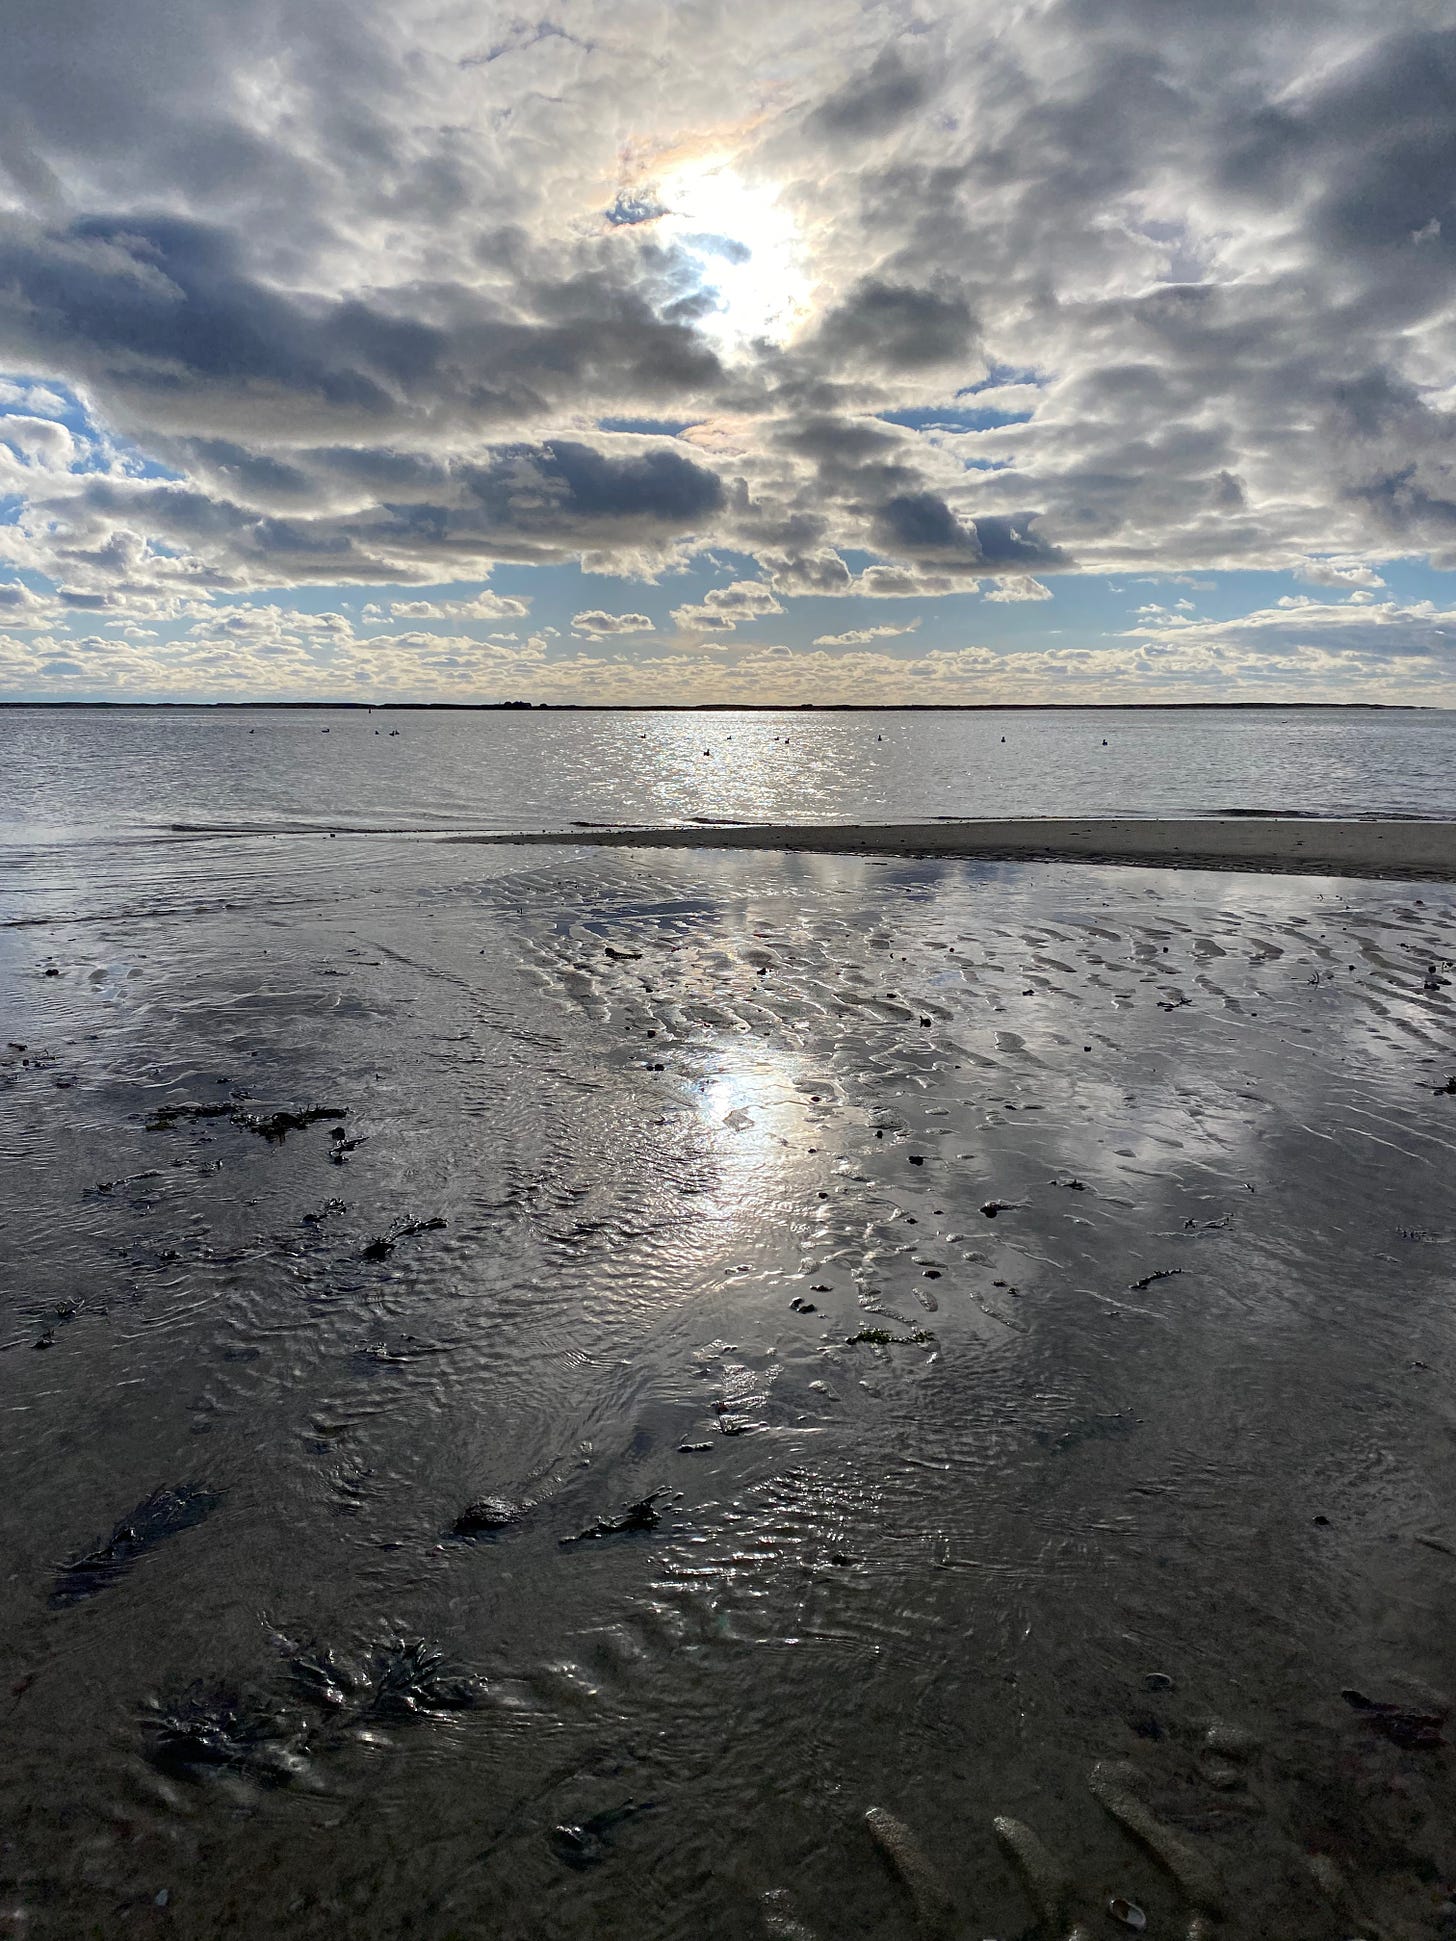 View of a sunlit beach. The sun is shimmering on pools of water, making glittering patterns in the sand. The clouds are dramatic.